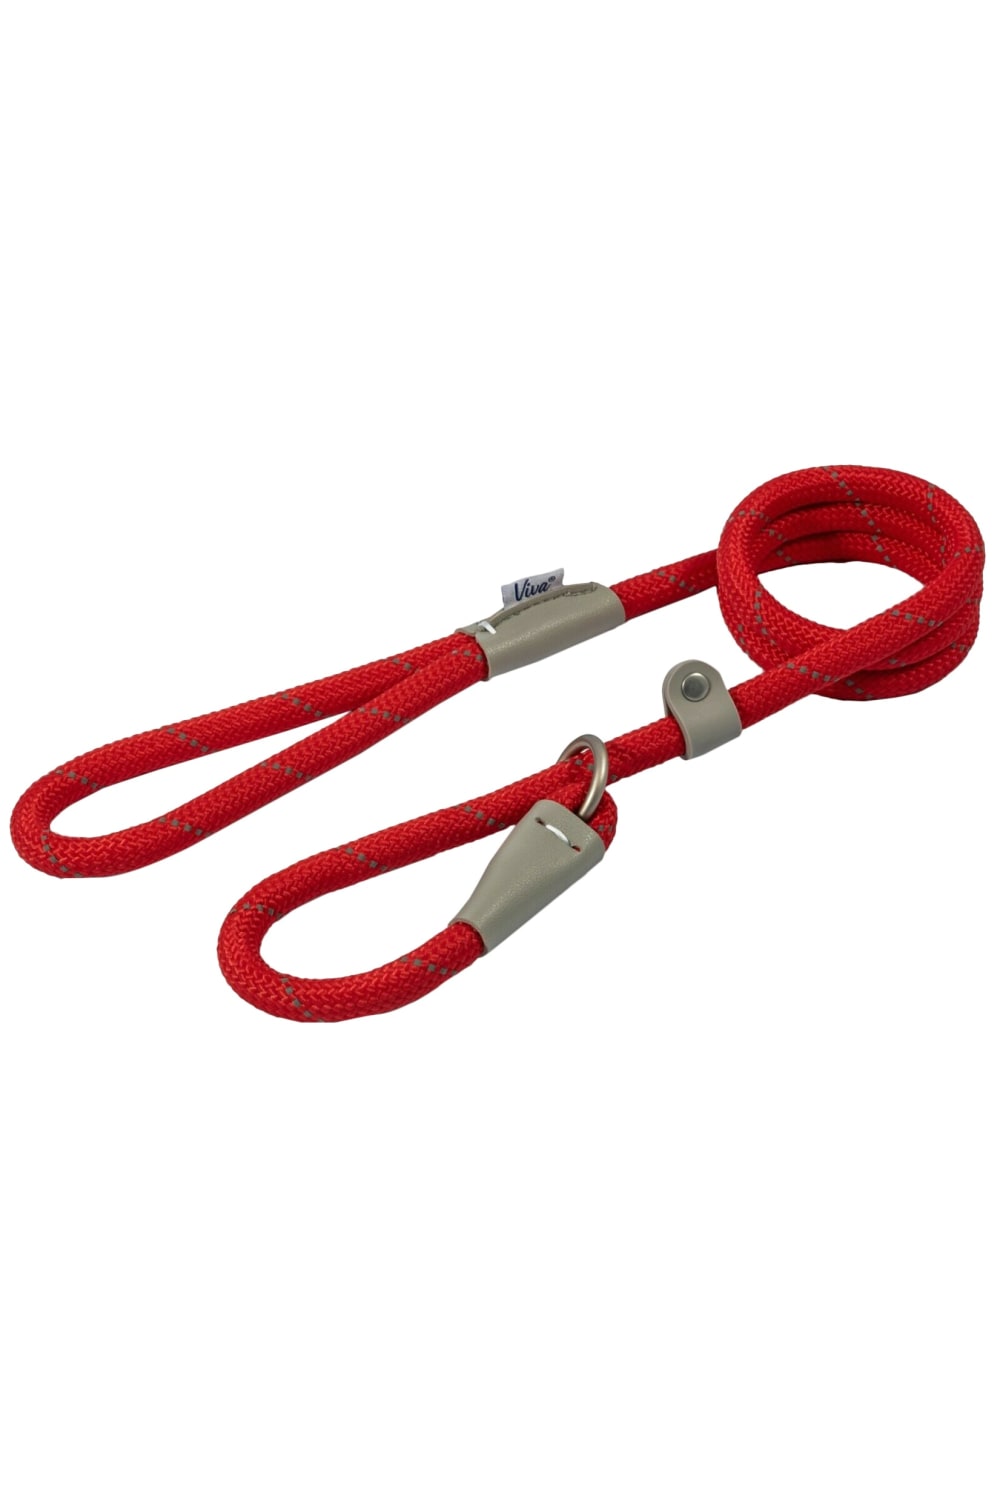 Ancol Leather Reflective Dog Slip Lead (Red) (120cm x 1.2cm)